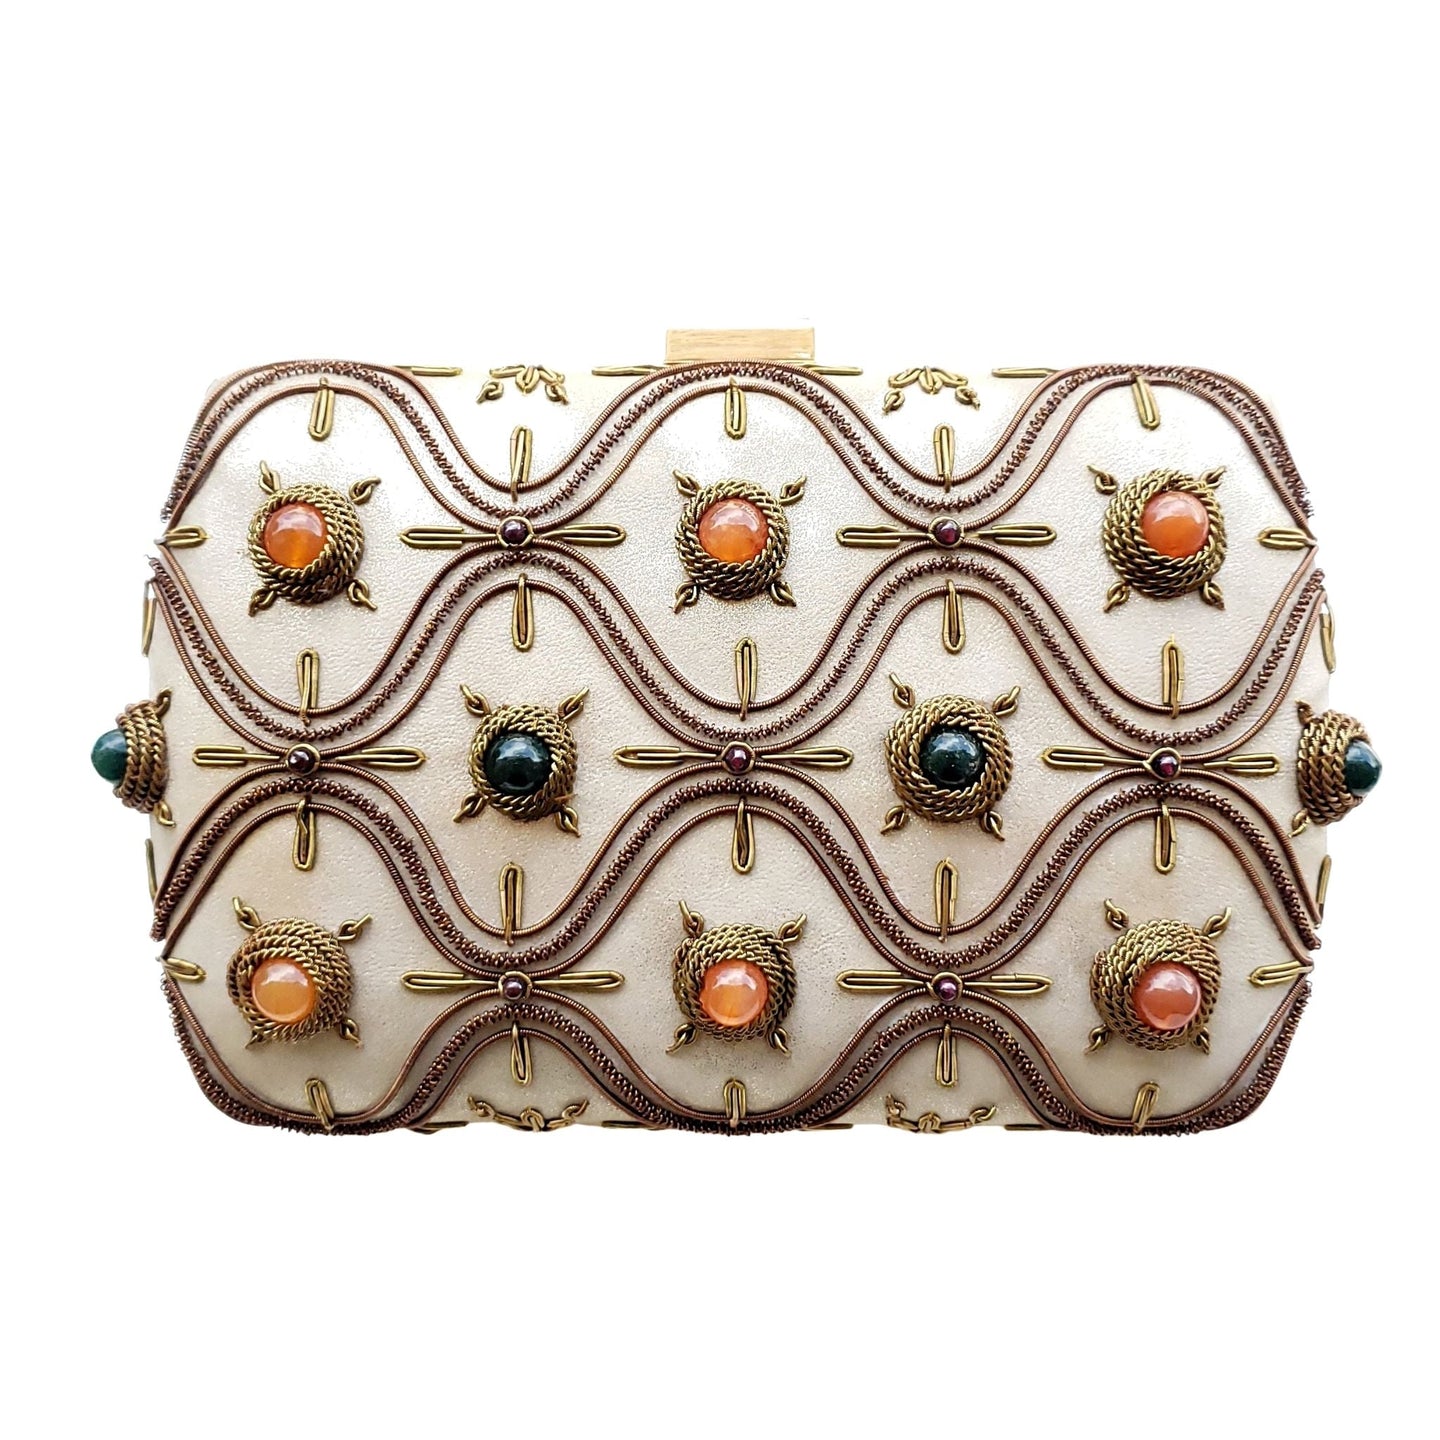 Gold hard case box clutch embroidered with copper and inlaid with jade and carnelian gemstones.